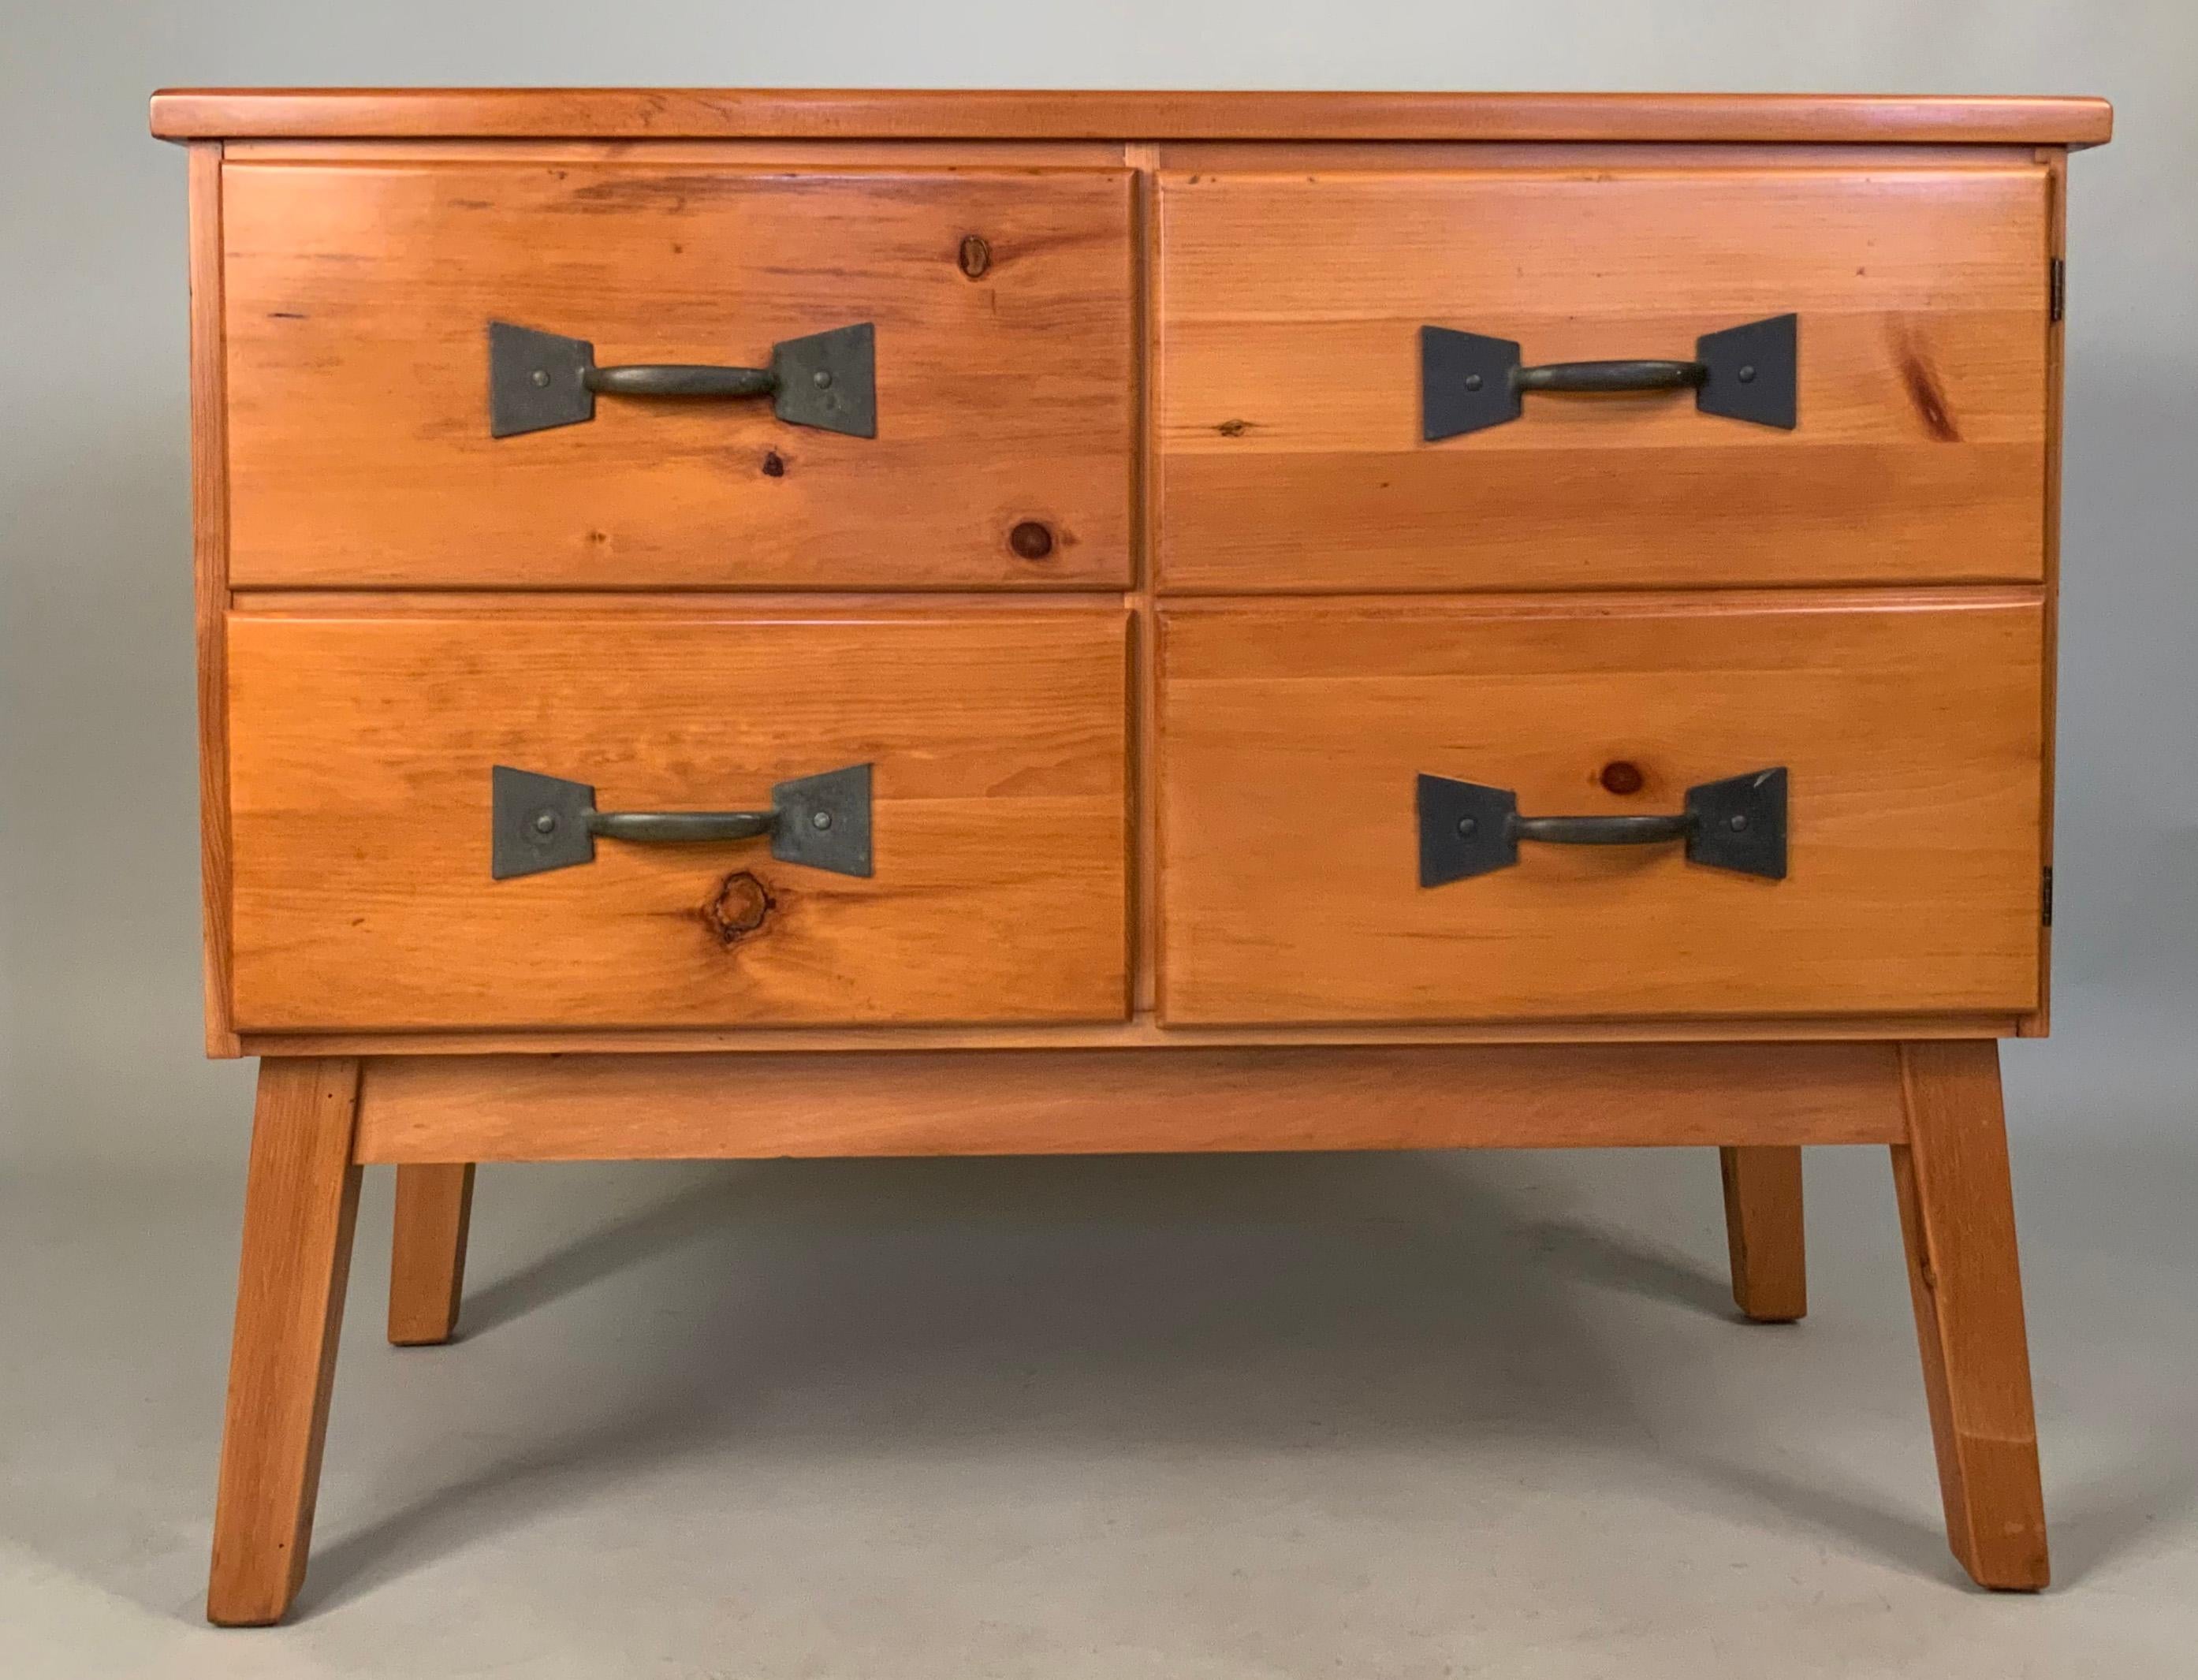 A very charming vintage 1960s pine chest/cabinet by Habitant, raised on pine legs, with patinated brass hardware. The left side of the case has a pair of drawers, and the right side has a hinged door made to look like another pair of drawers. The